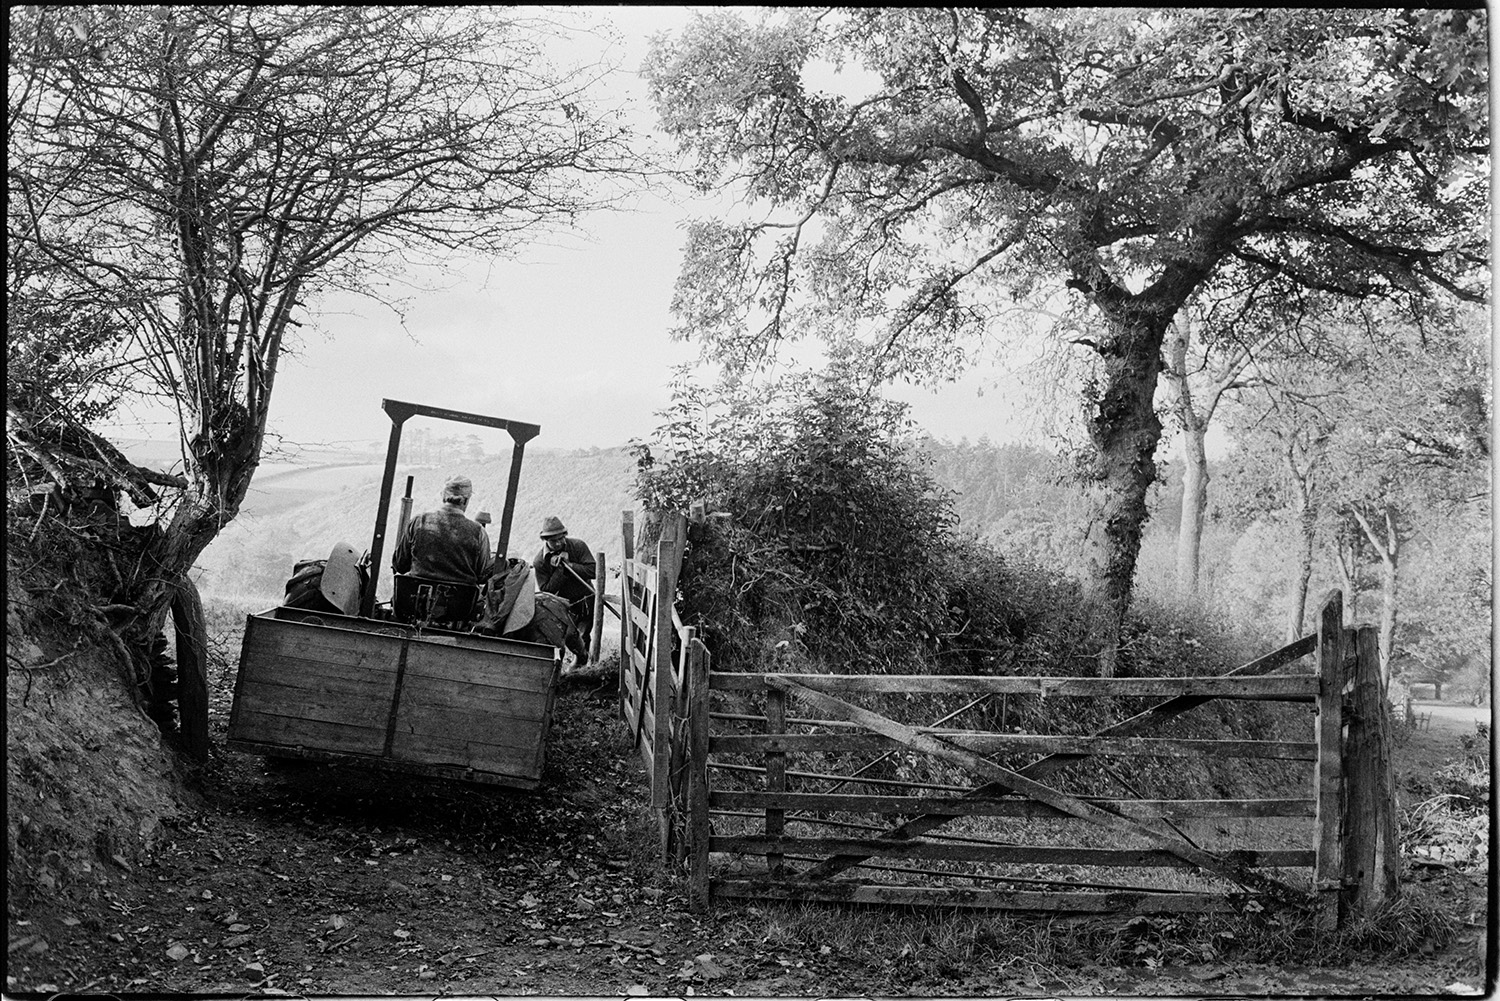 Farmers mending fencing. 
[Alf Pugsley driving a tractor and link box through an open field gateway at Lower Langham, Dolton. Stephen Squire is holding back part of the gate or fence by the field entrance.]